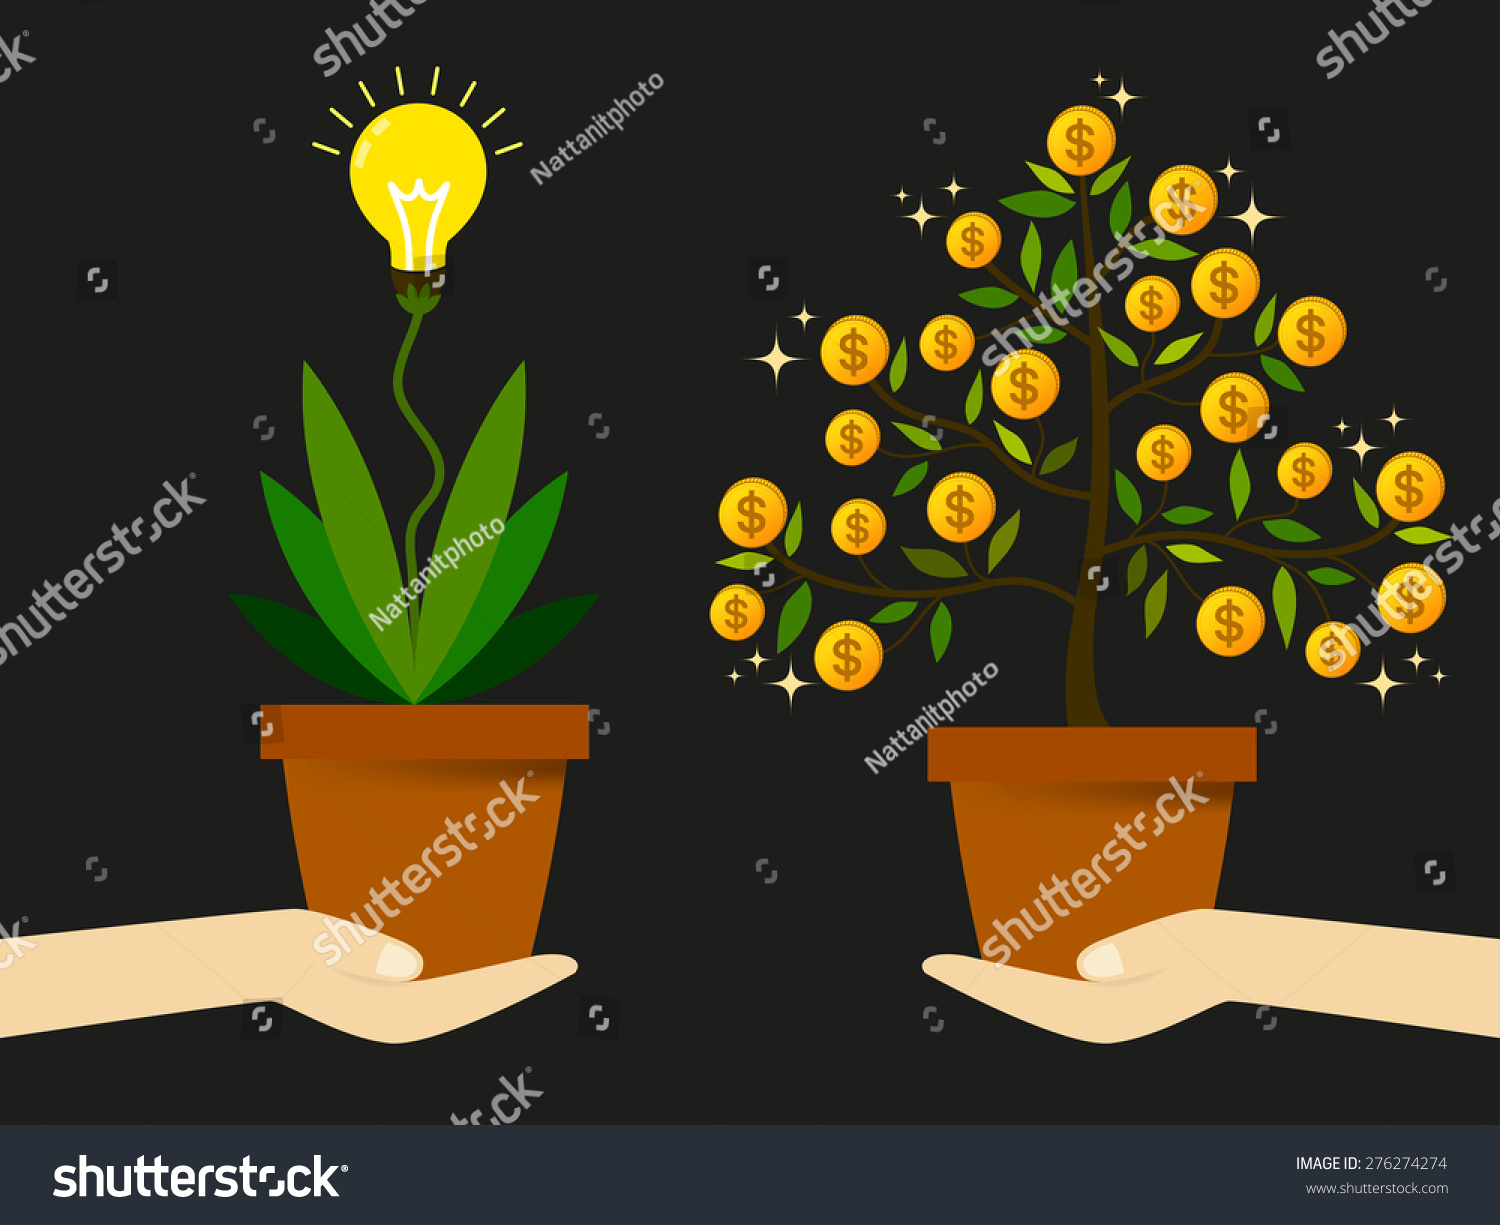 SVG of Create new ideas to find a way to generate revenue to increase profit from business. svg